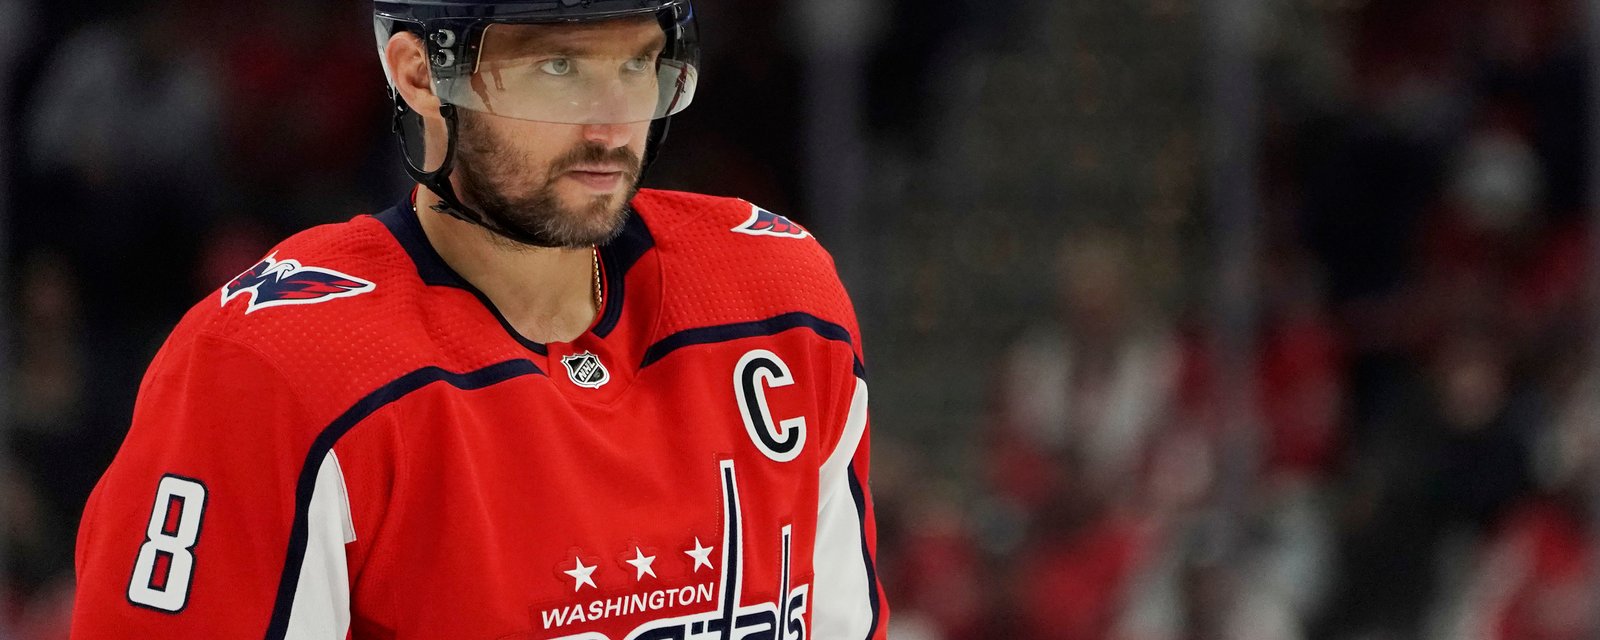 Alex Ovechkin represents himself to get new deal done